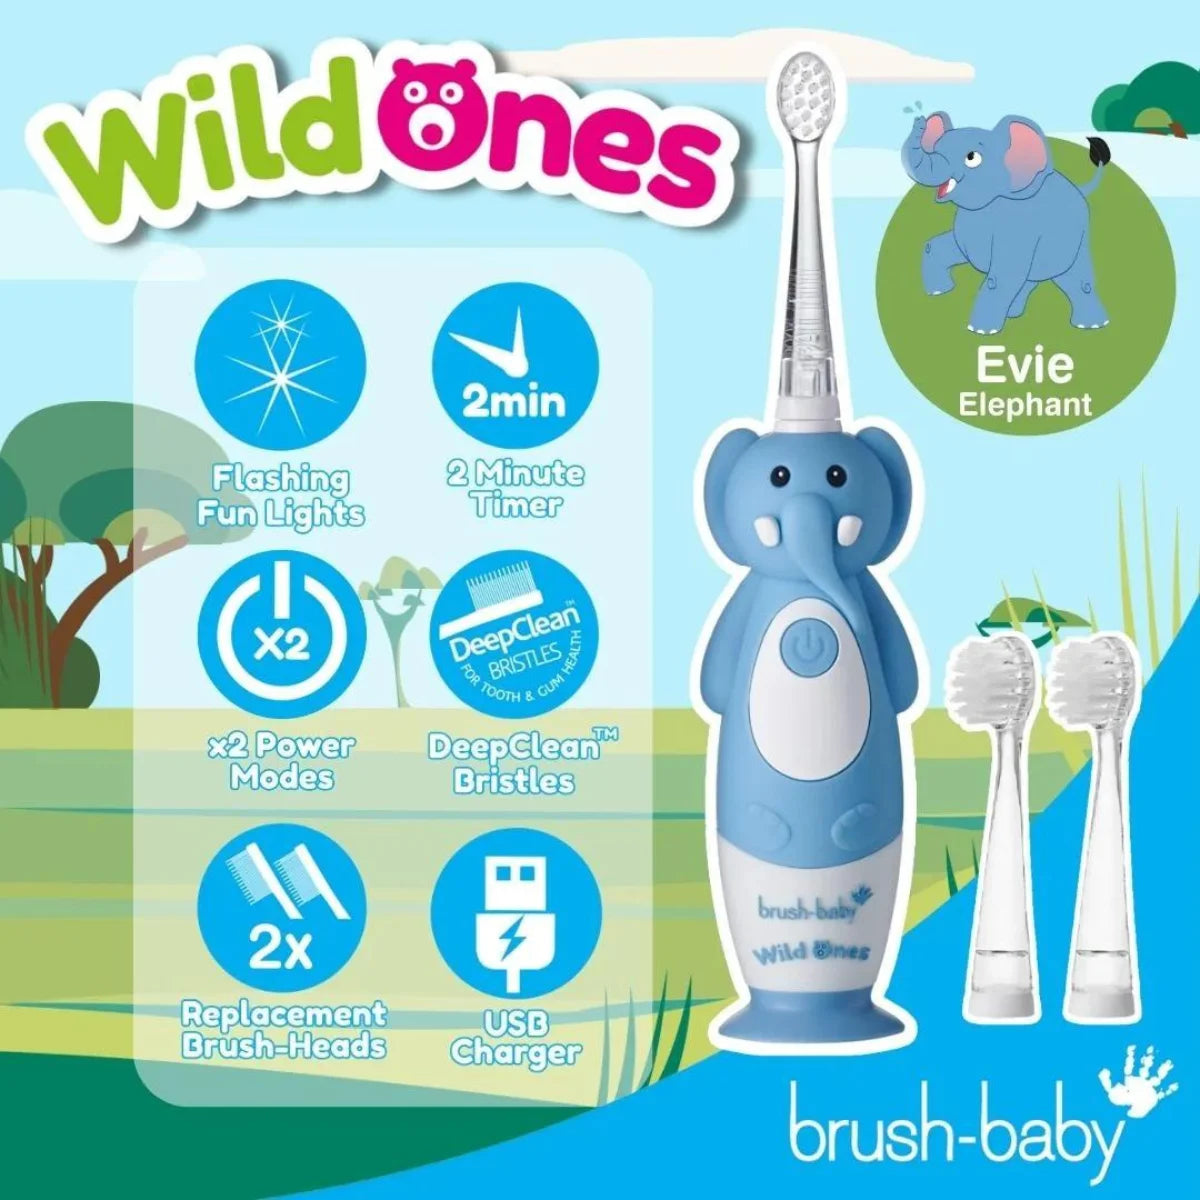 brushbaby WildOnes Elephant Kids Electric Rechargeable Toothbrush for children 